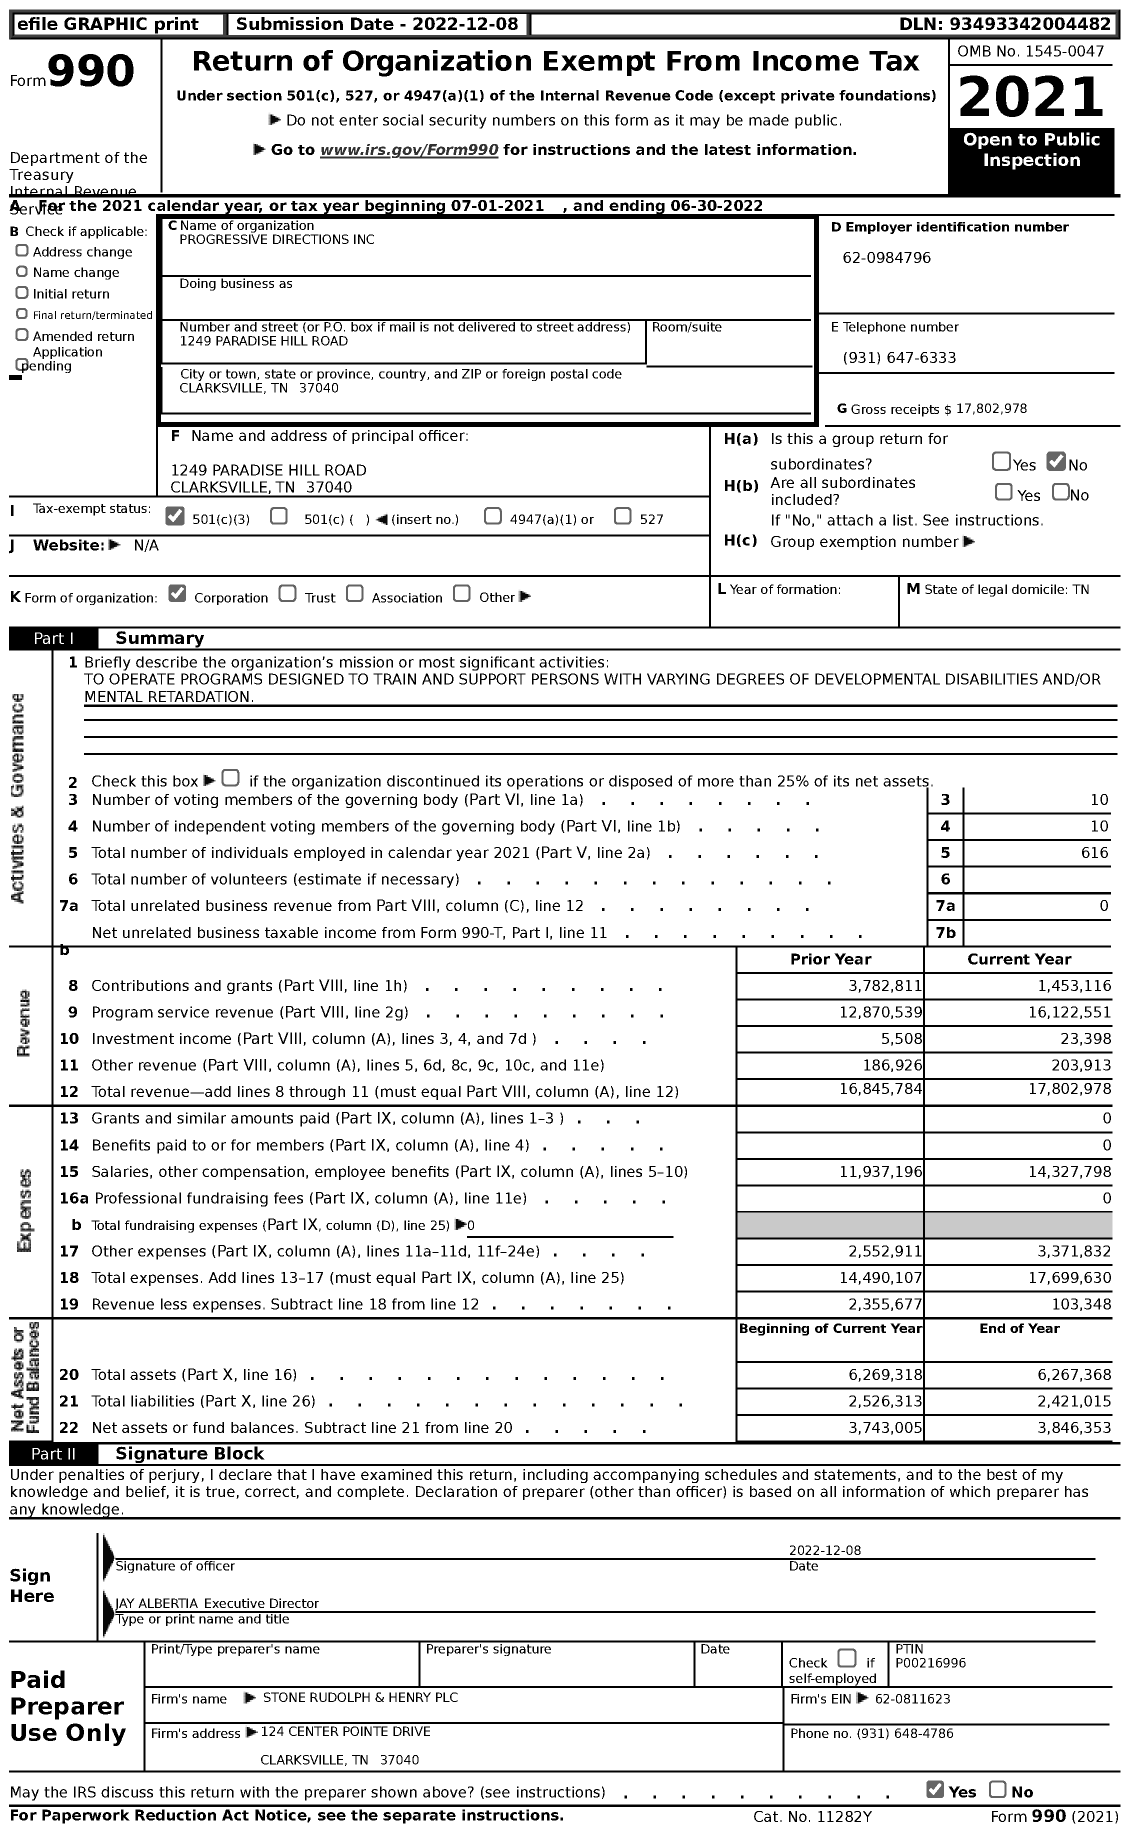 Image of first page of 2021 Form 990 for Progressive Directions (PDI)